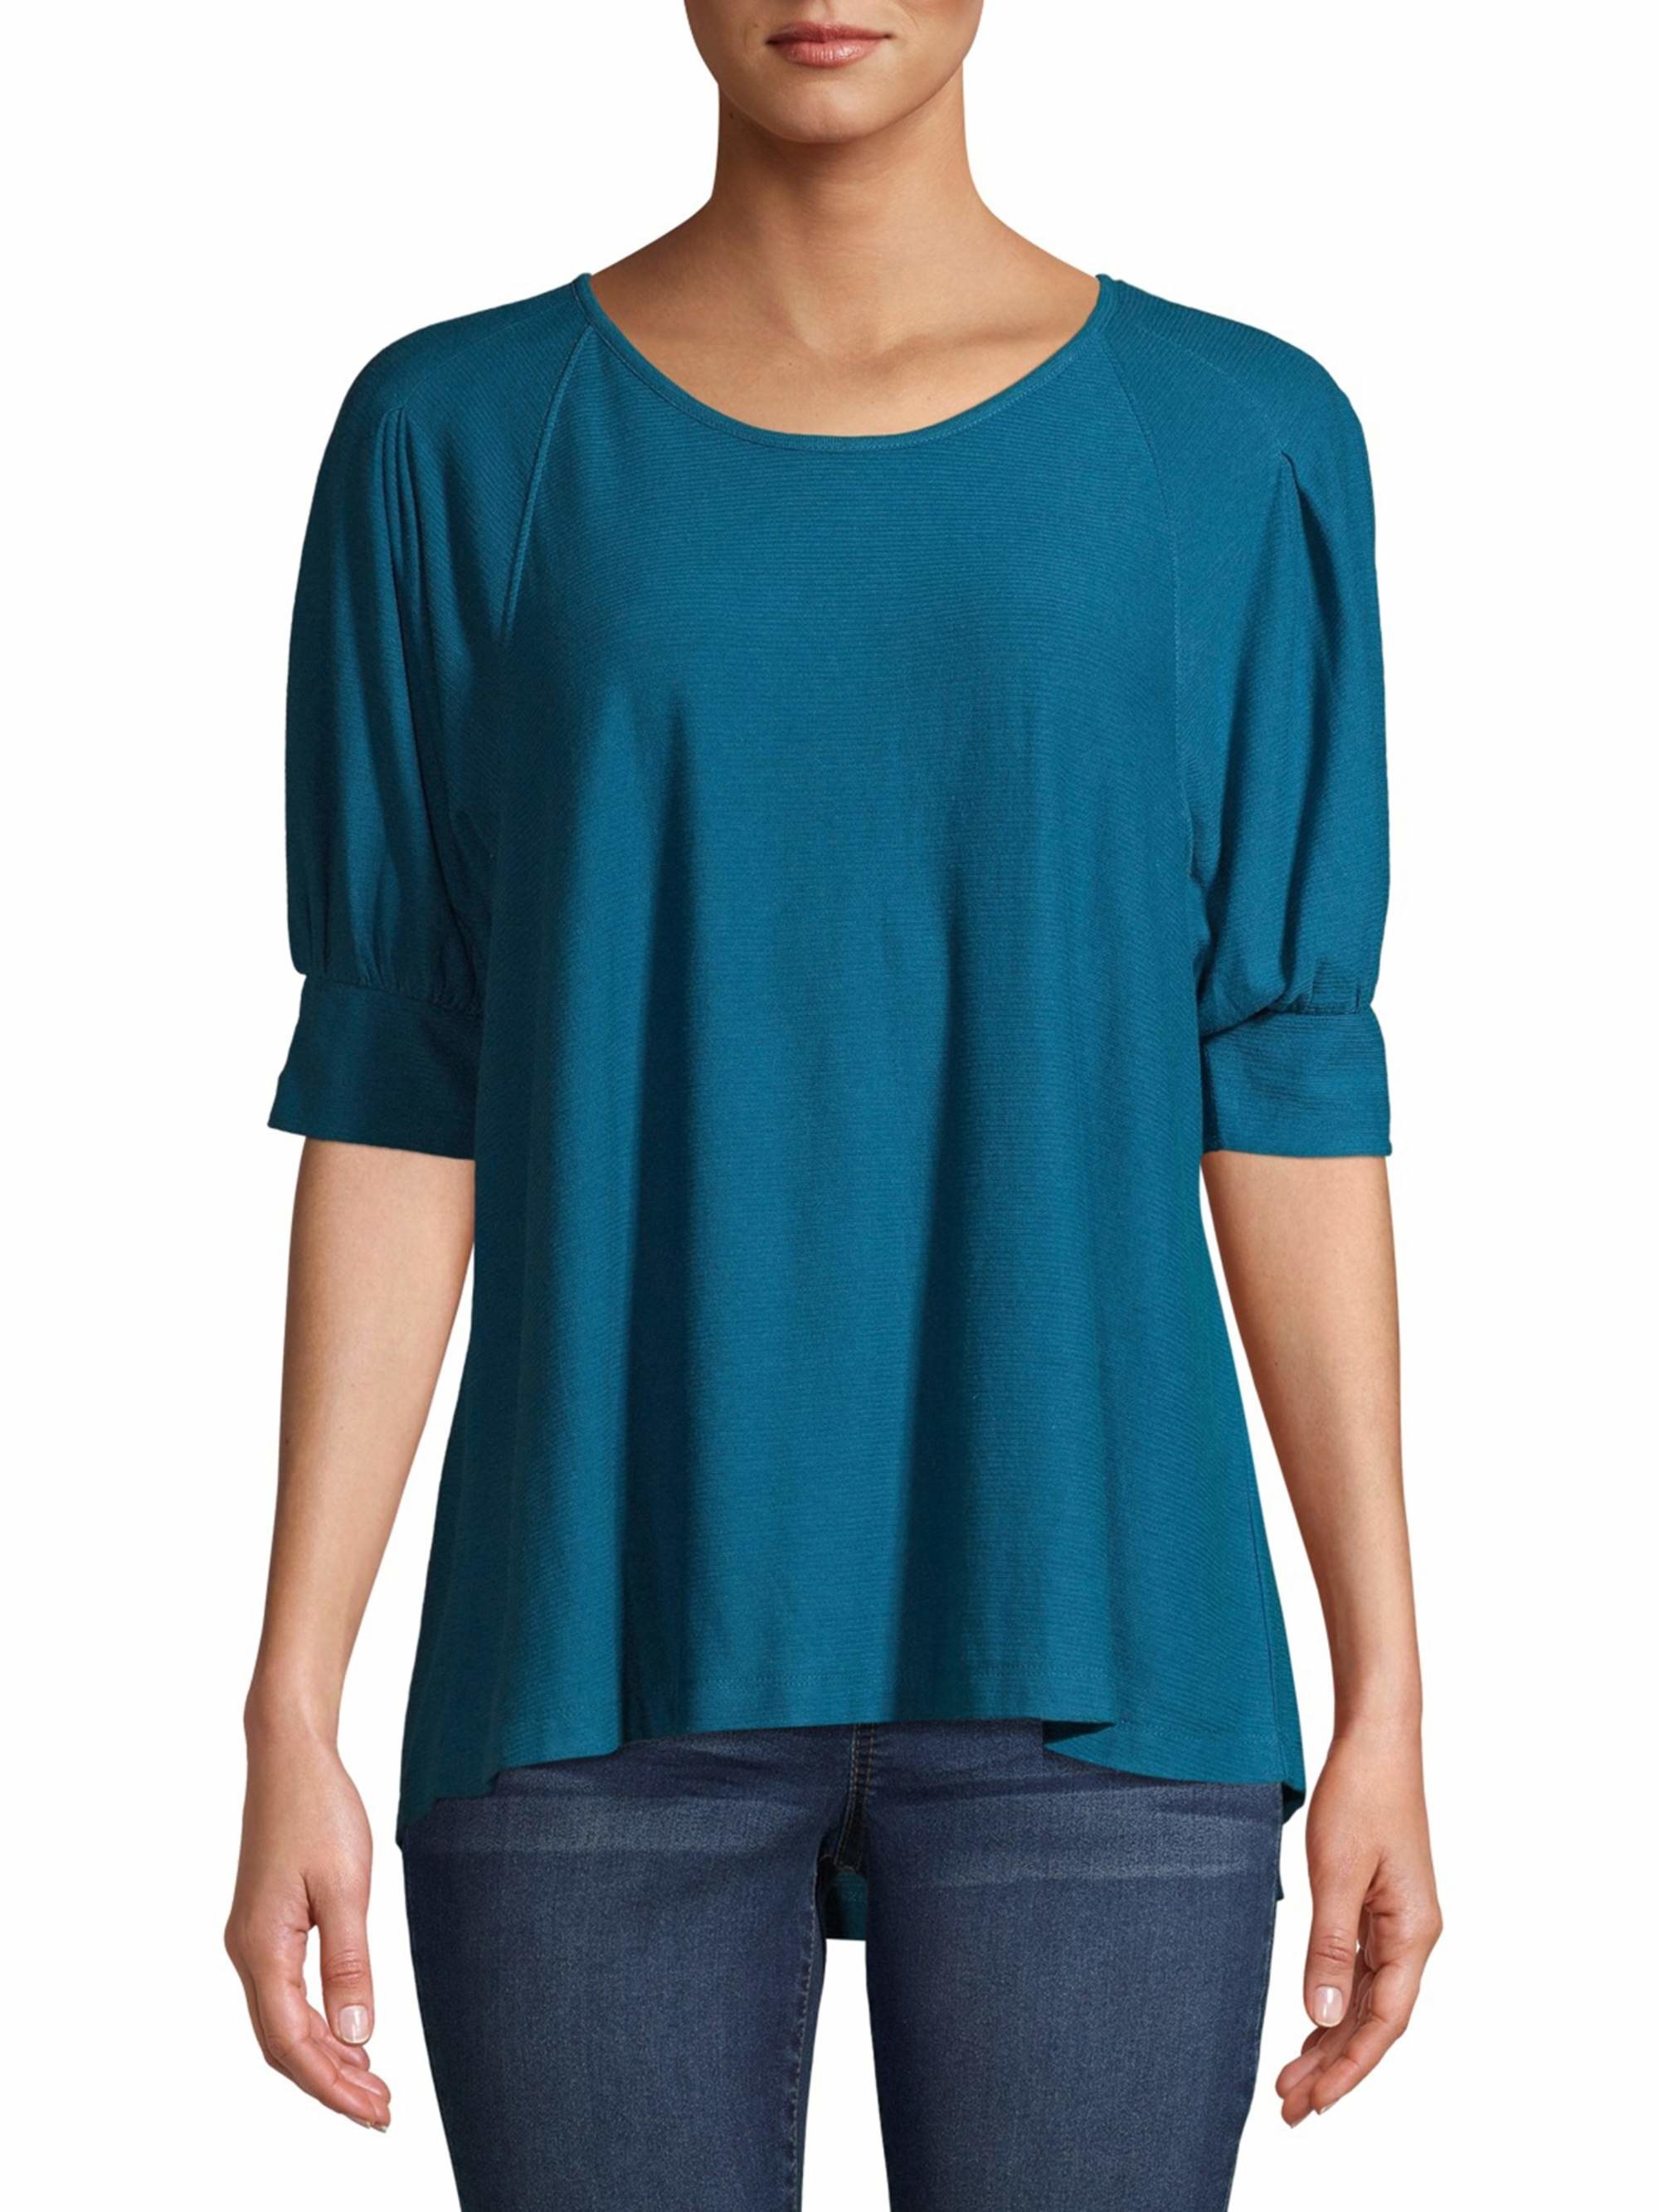 Model in a blue elbow-length sleeved pleated top 